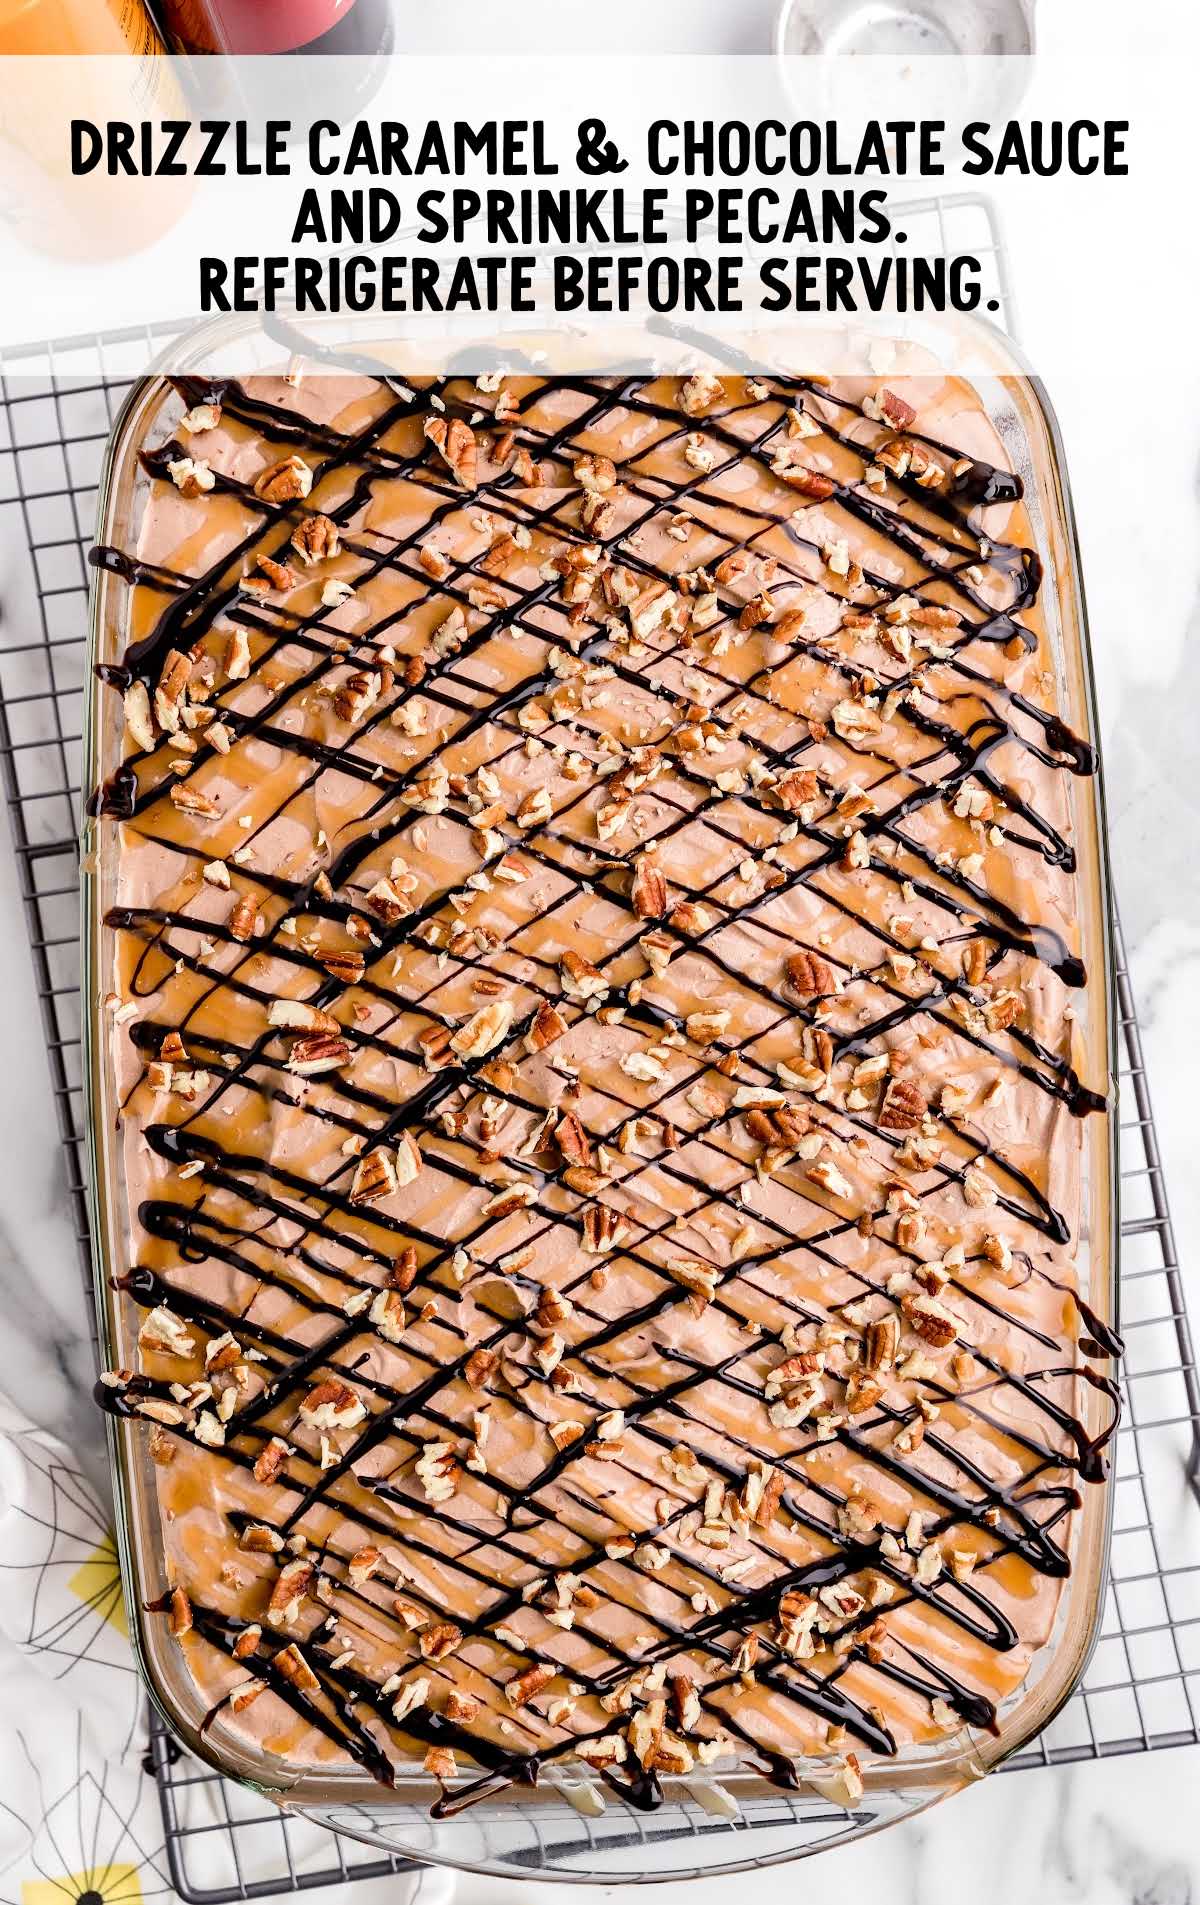 cake drizzled with caramel and chocolate sauce then sprinkled with pecans